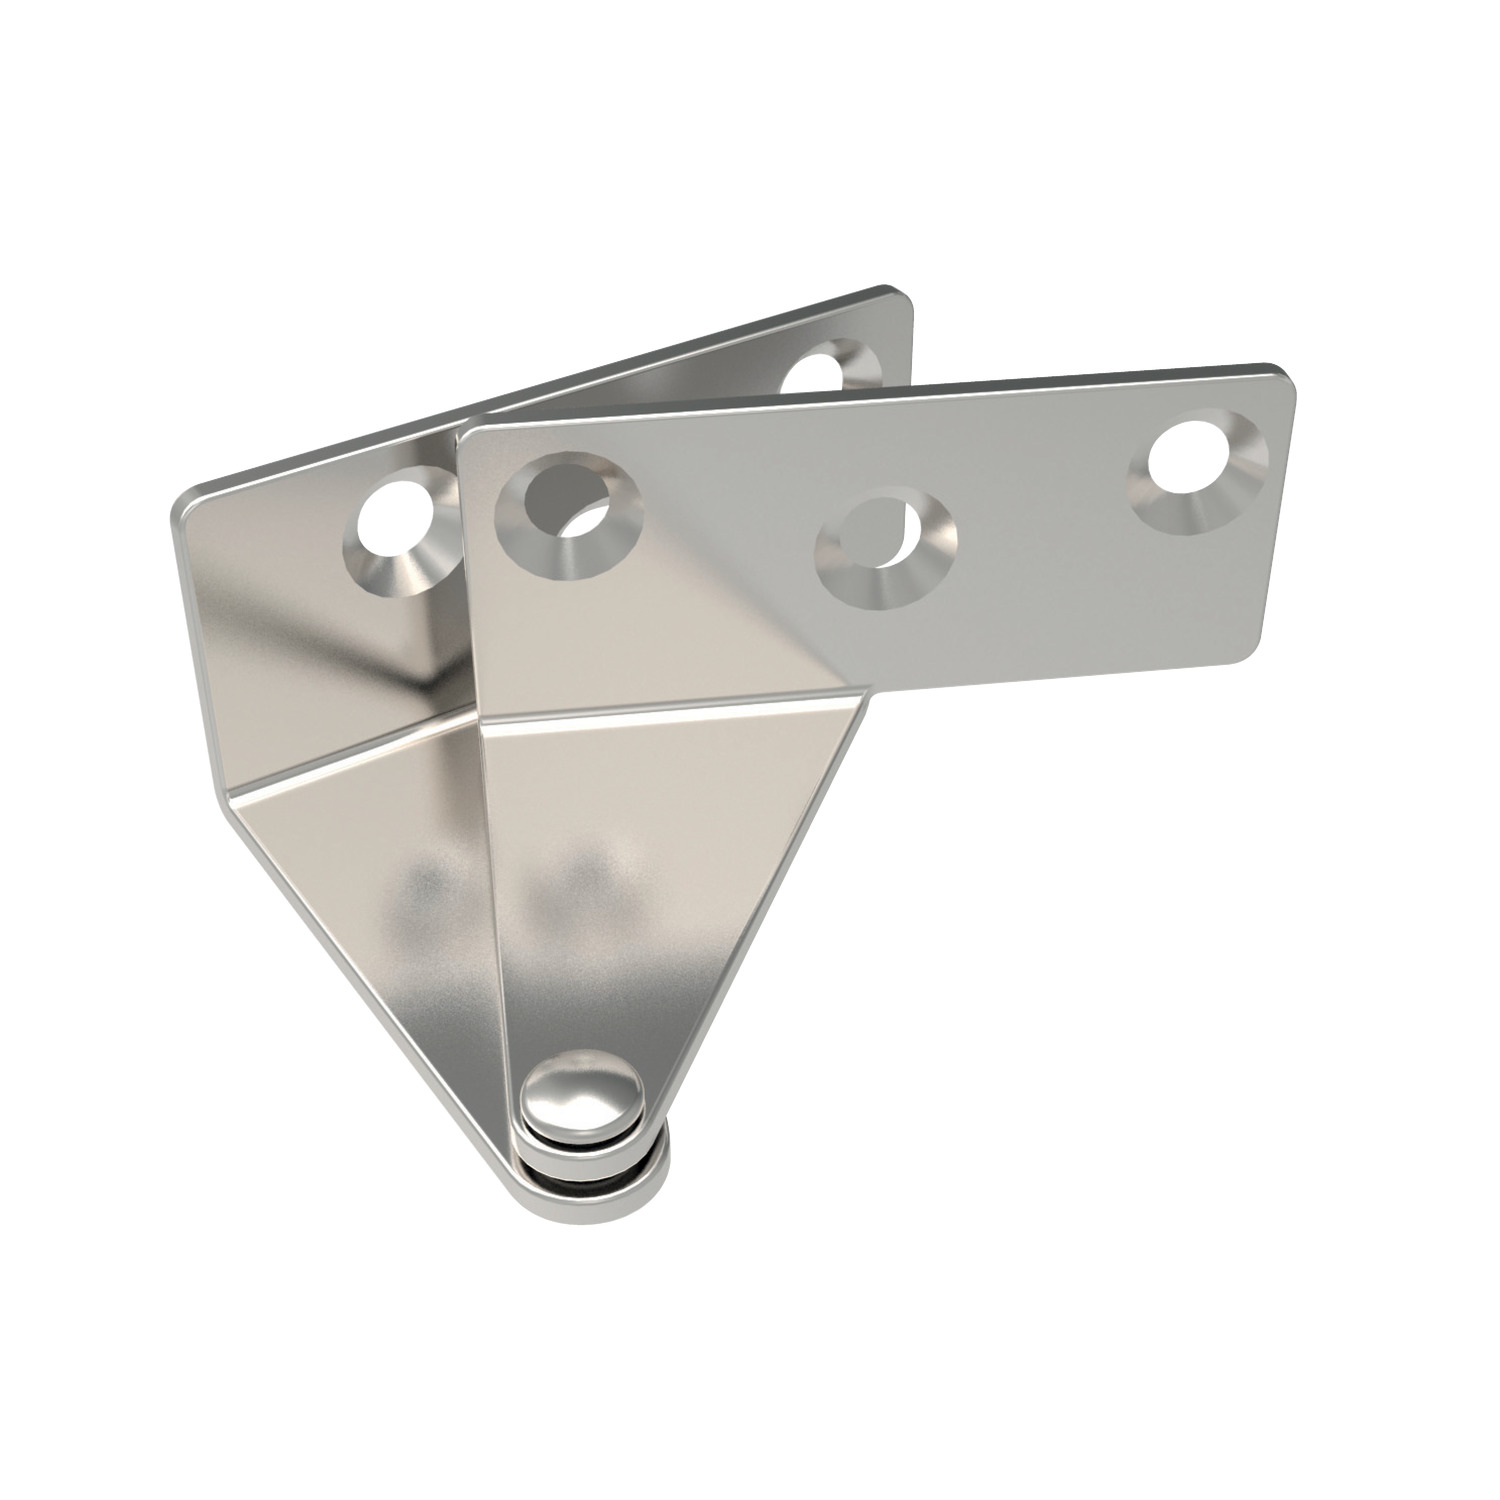 S0240.AC0010 Surface Mount - Pivot Hinges Overlay - Stainless steel - Right